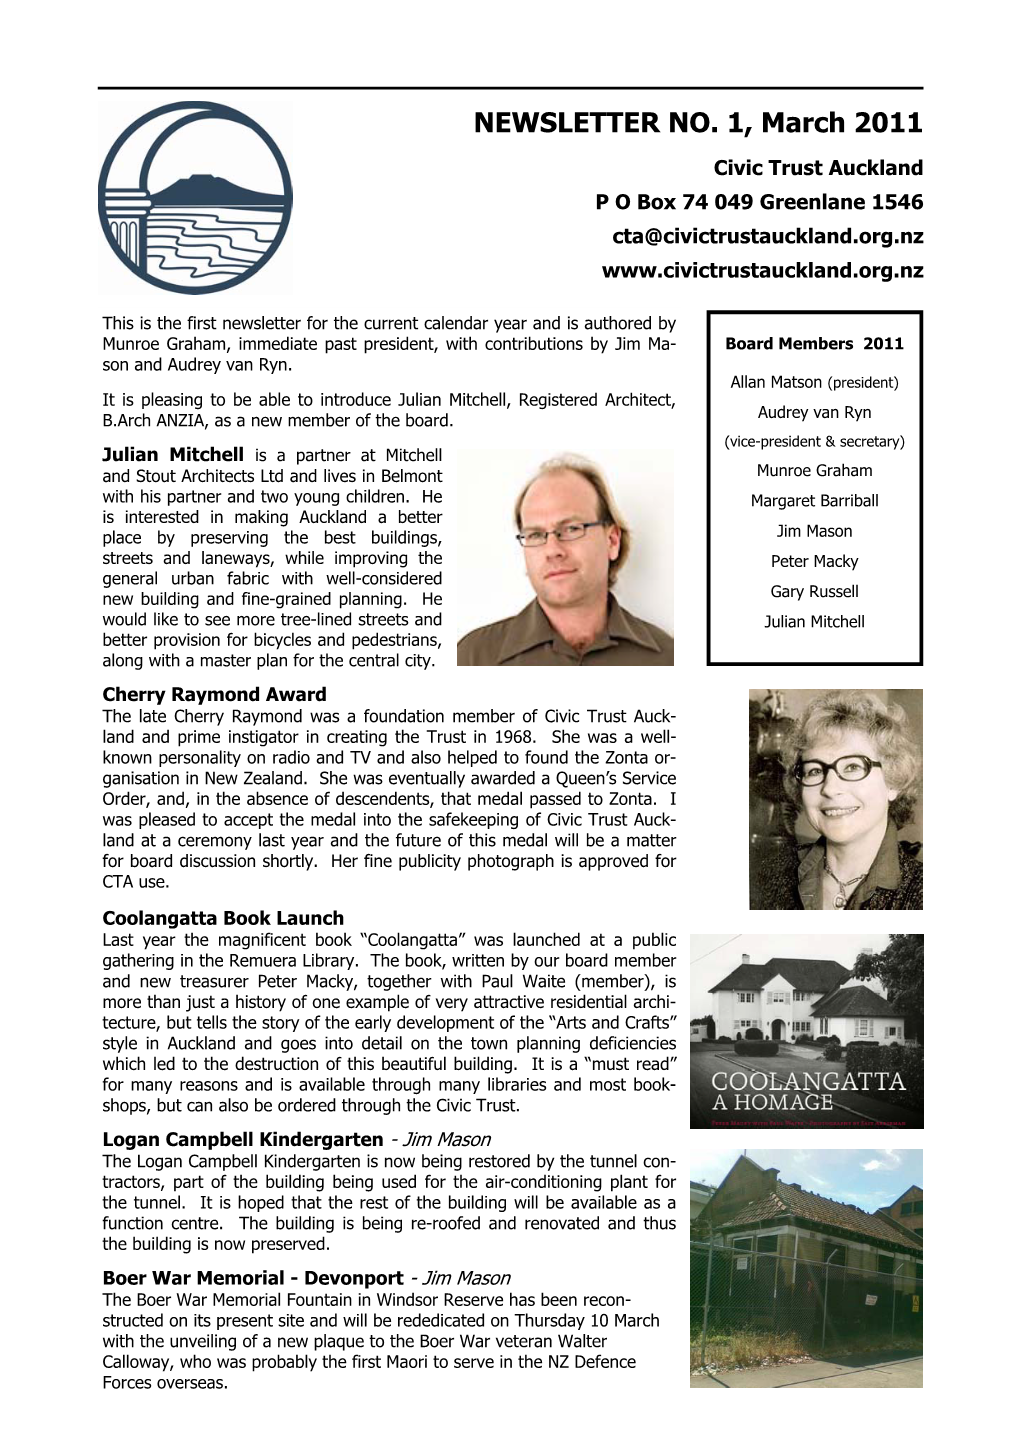 Civic Trust Auckland Newsletter March 2011